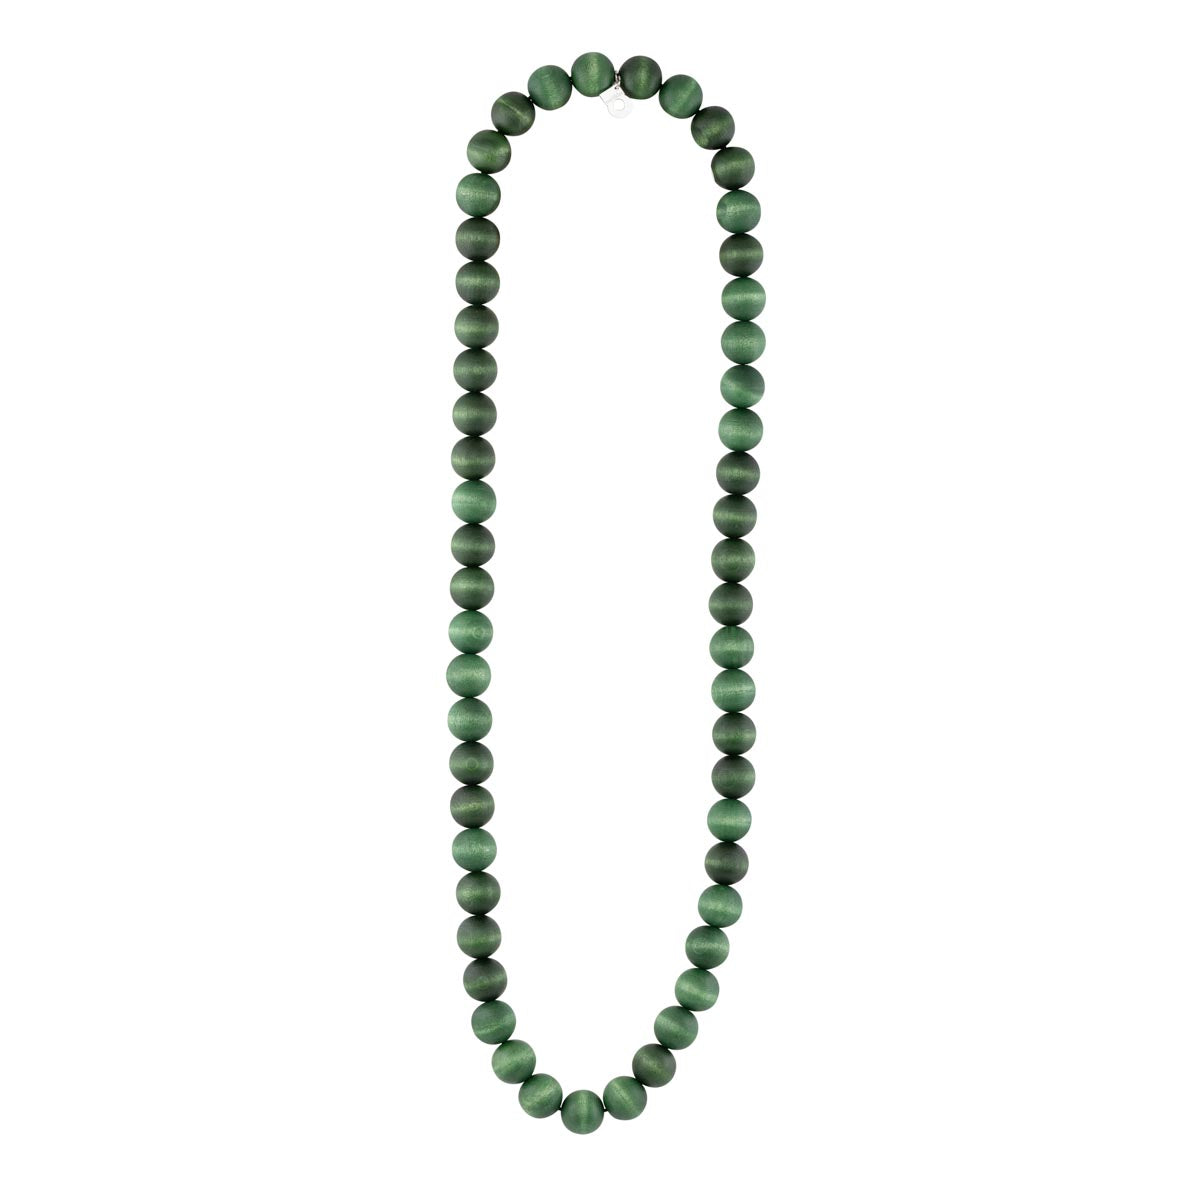 Suometar necklace, green